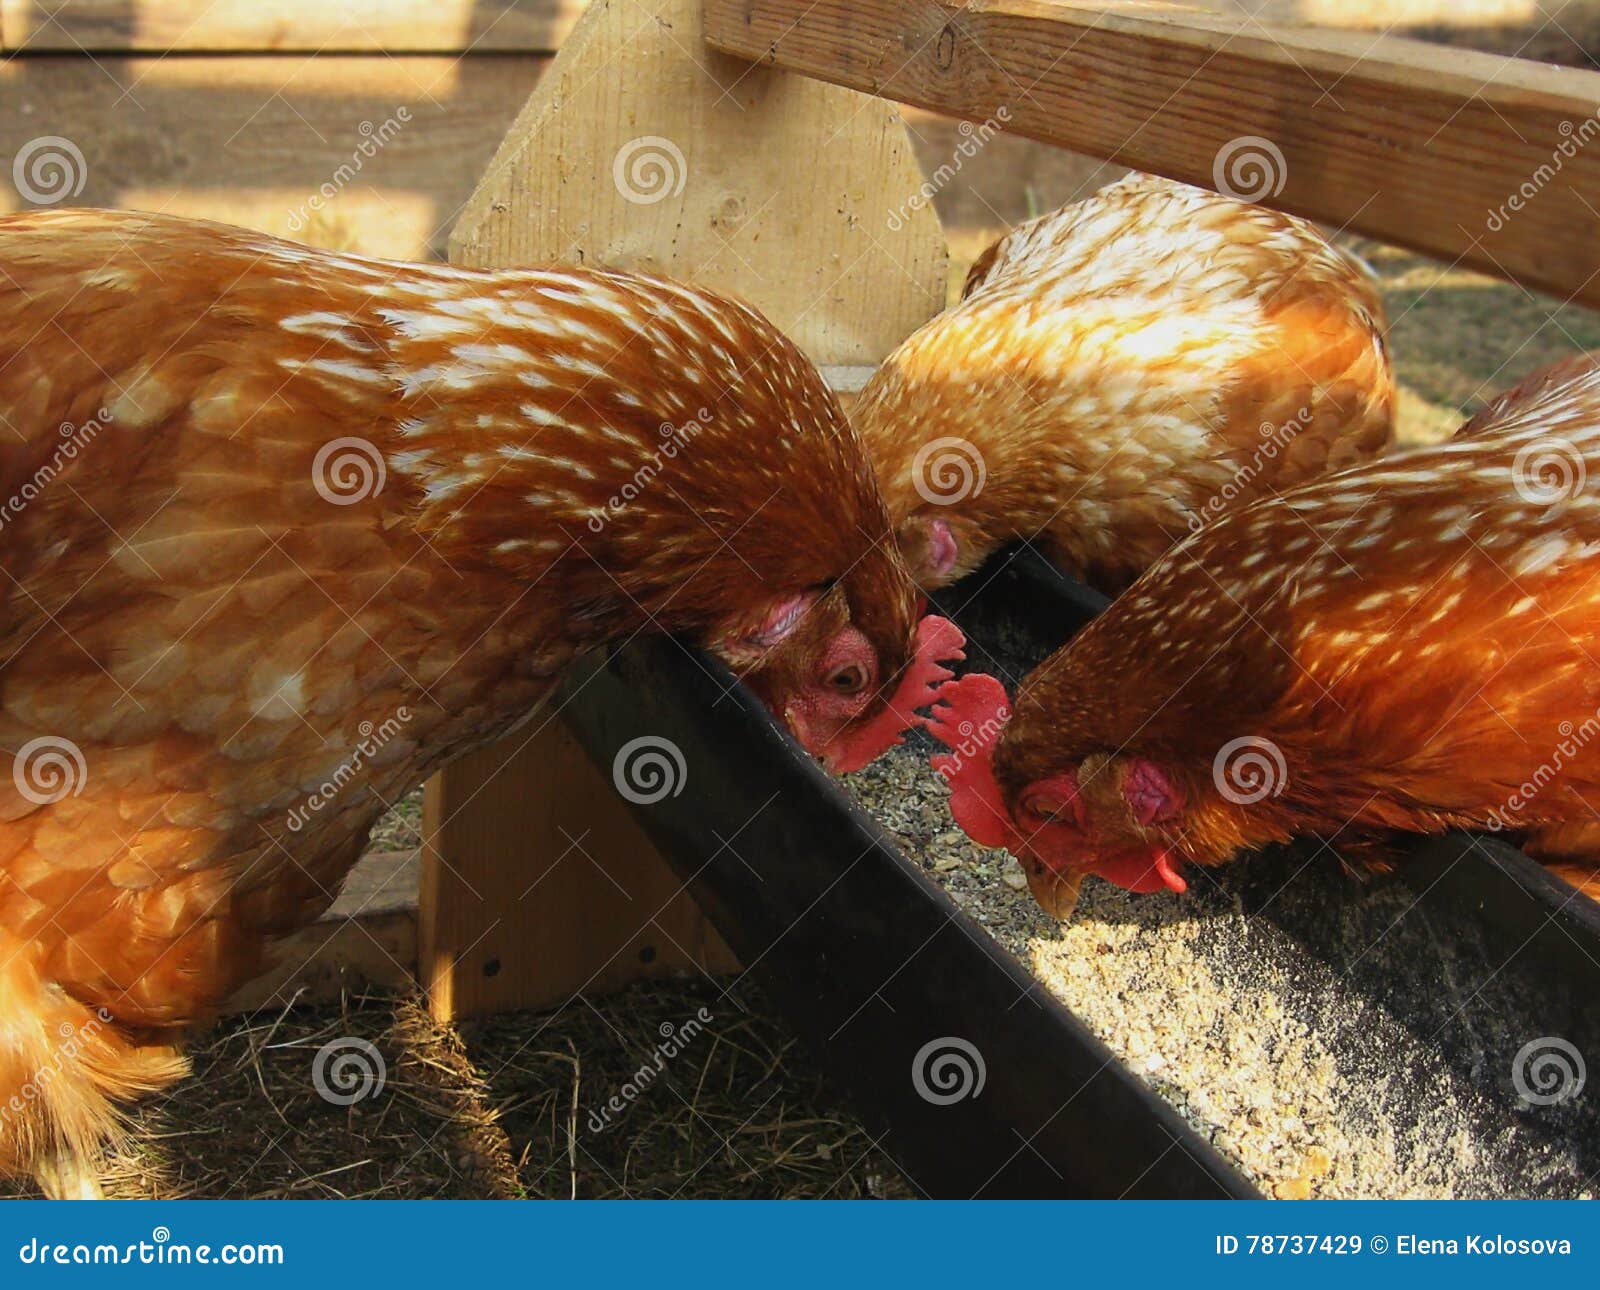 chickens peck grain from the trough